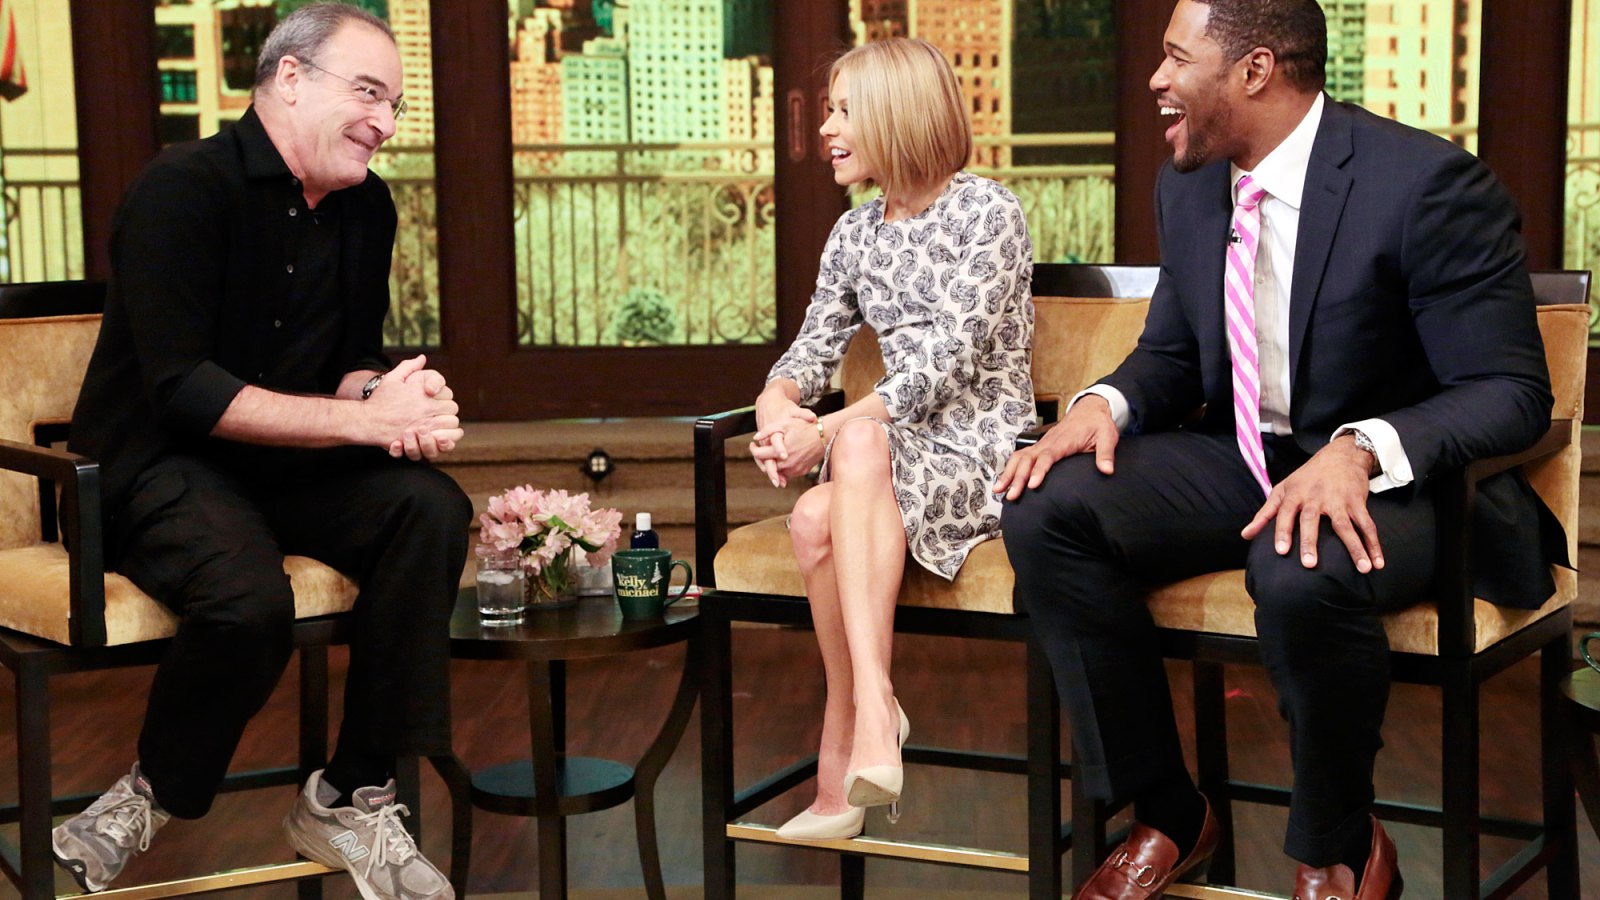 Mandy Patinkin on "Live! with Kelly and Michael" on December 5, 2013